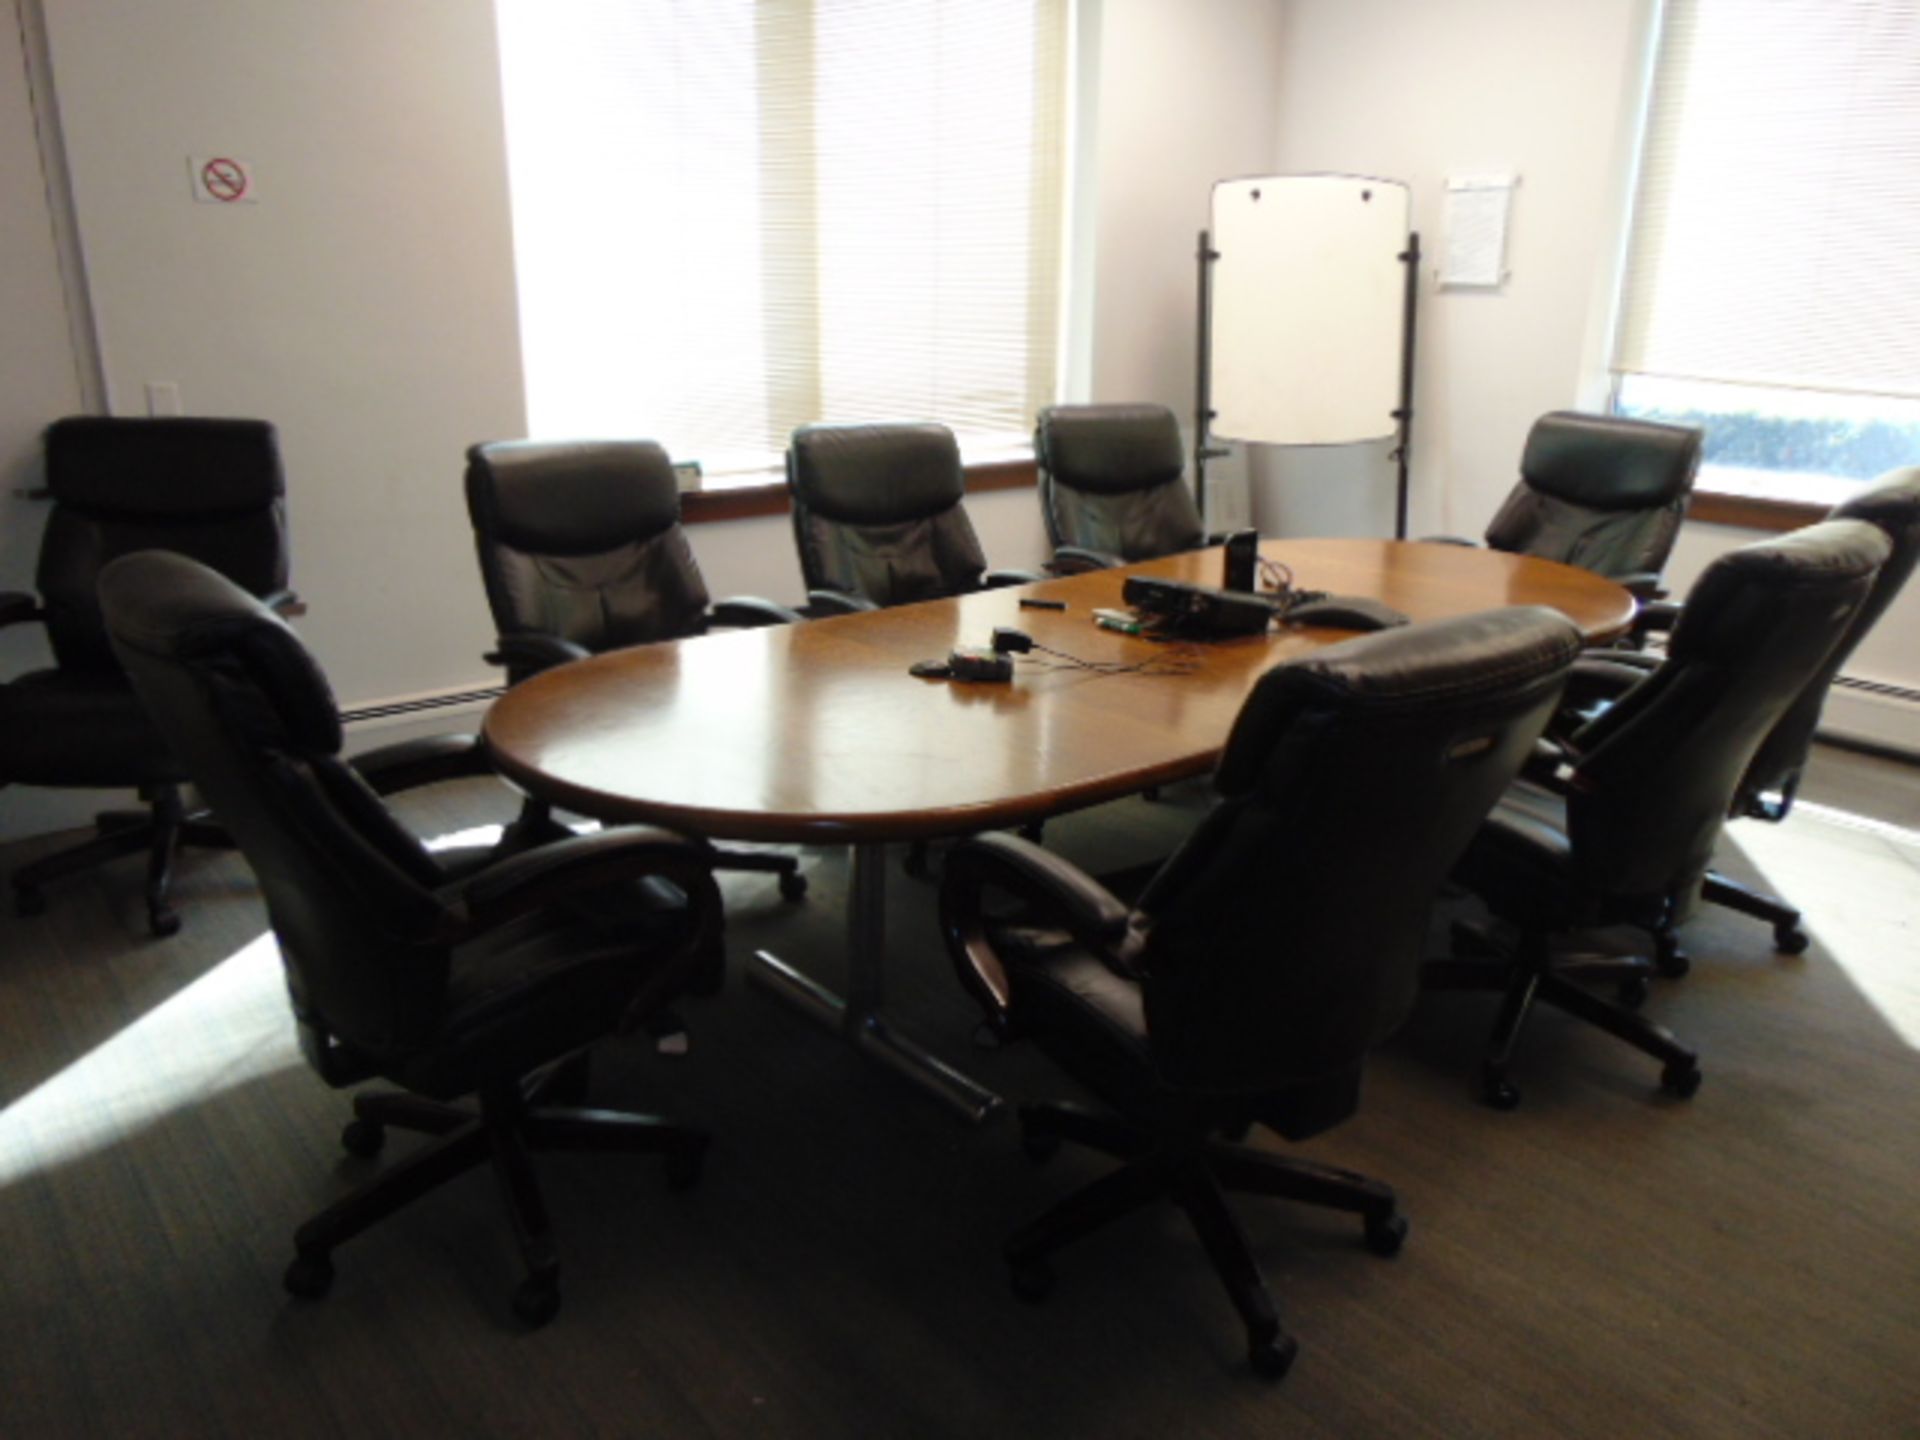 LOT CONSISTING OF: 120" x 49" conference table, (9) chairs, (2) tables, Epson overhead projector &